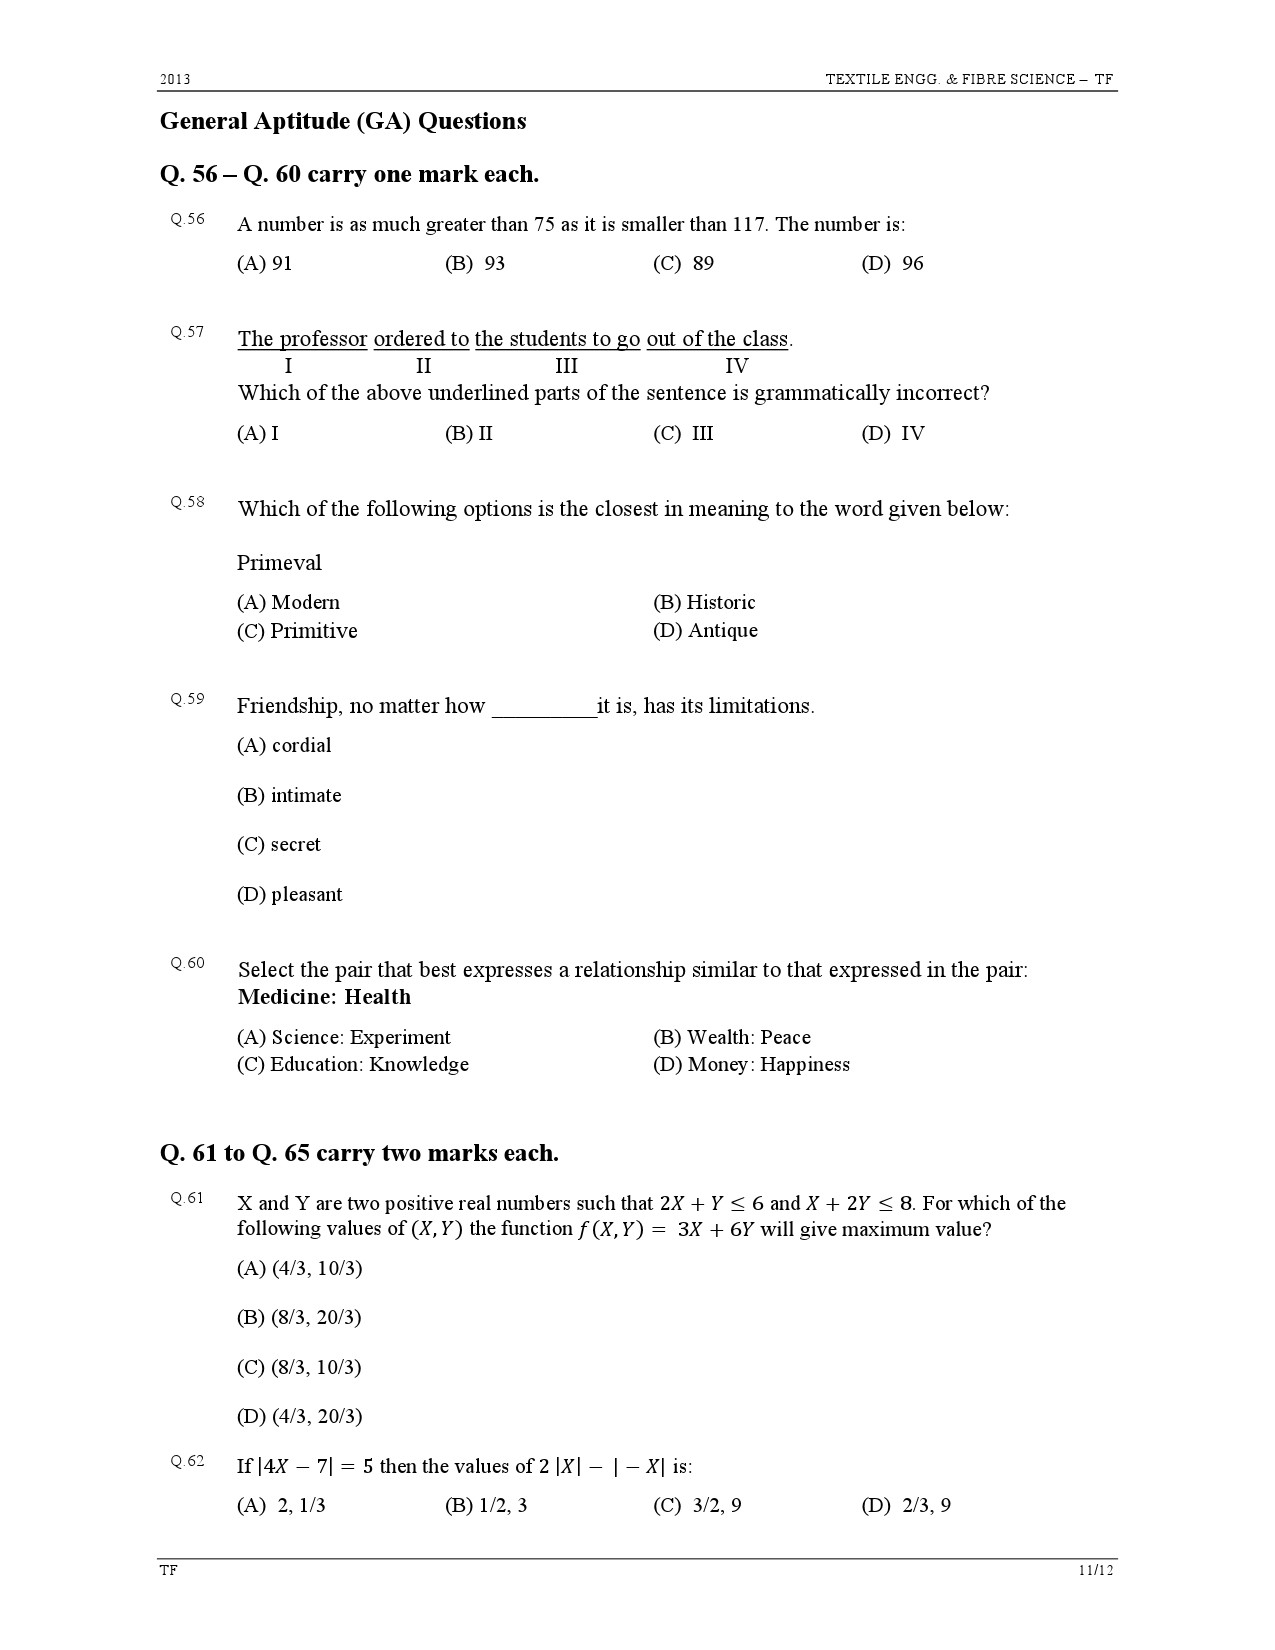 GATE Exam Question Paper 2013 Textile Engineering and Fibre Science 11